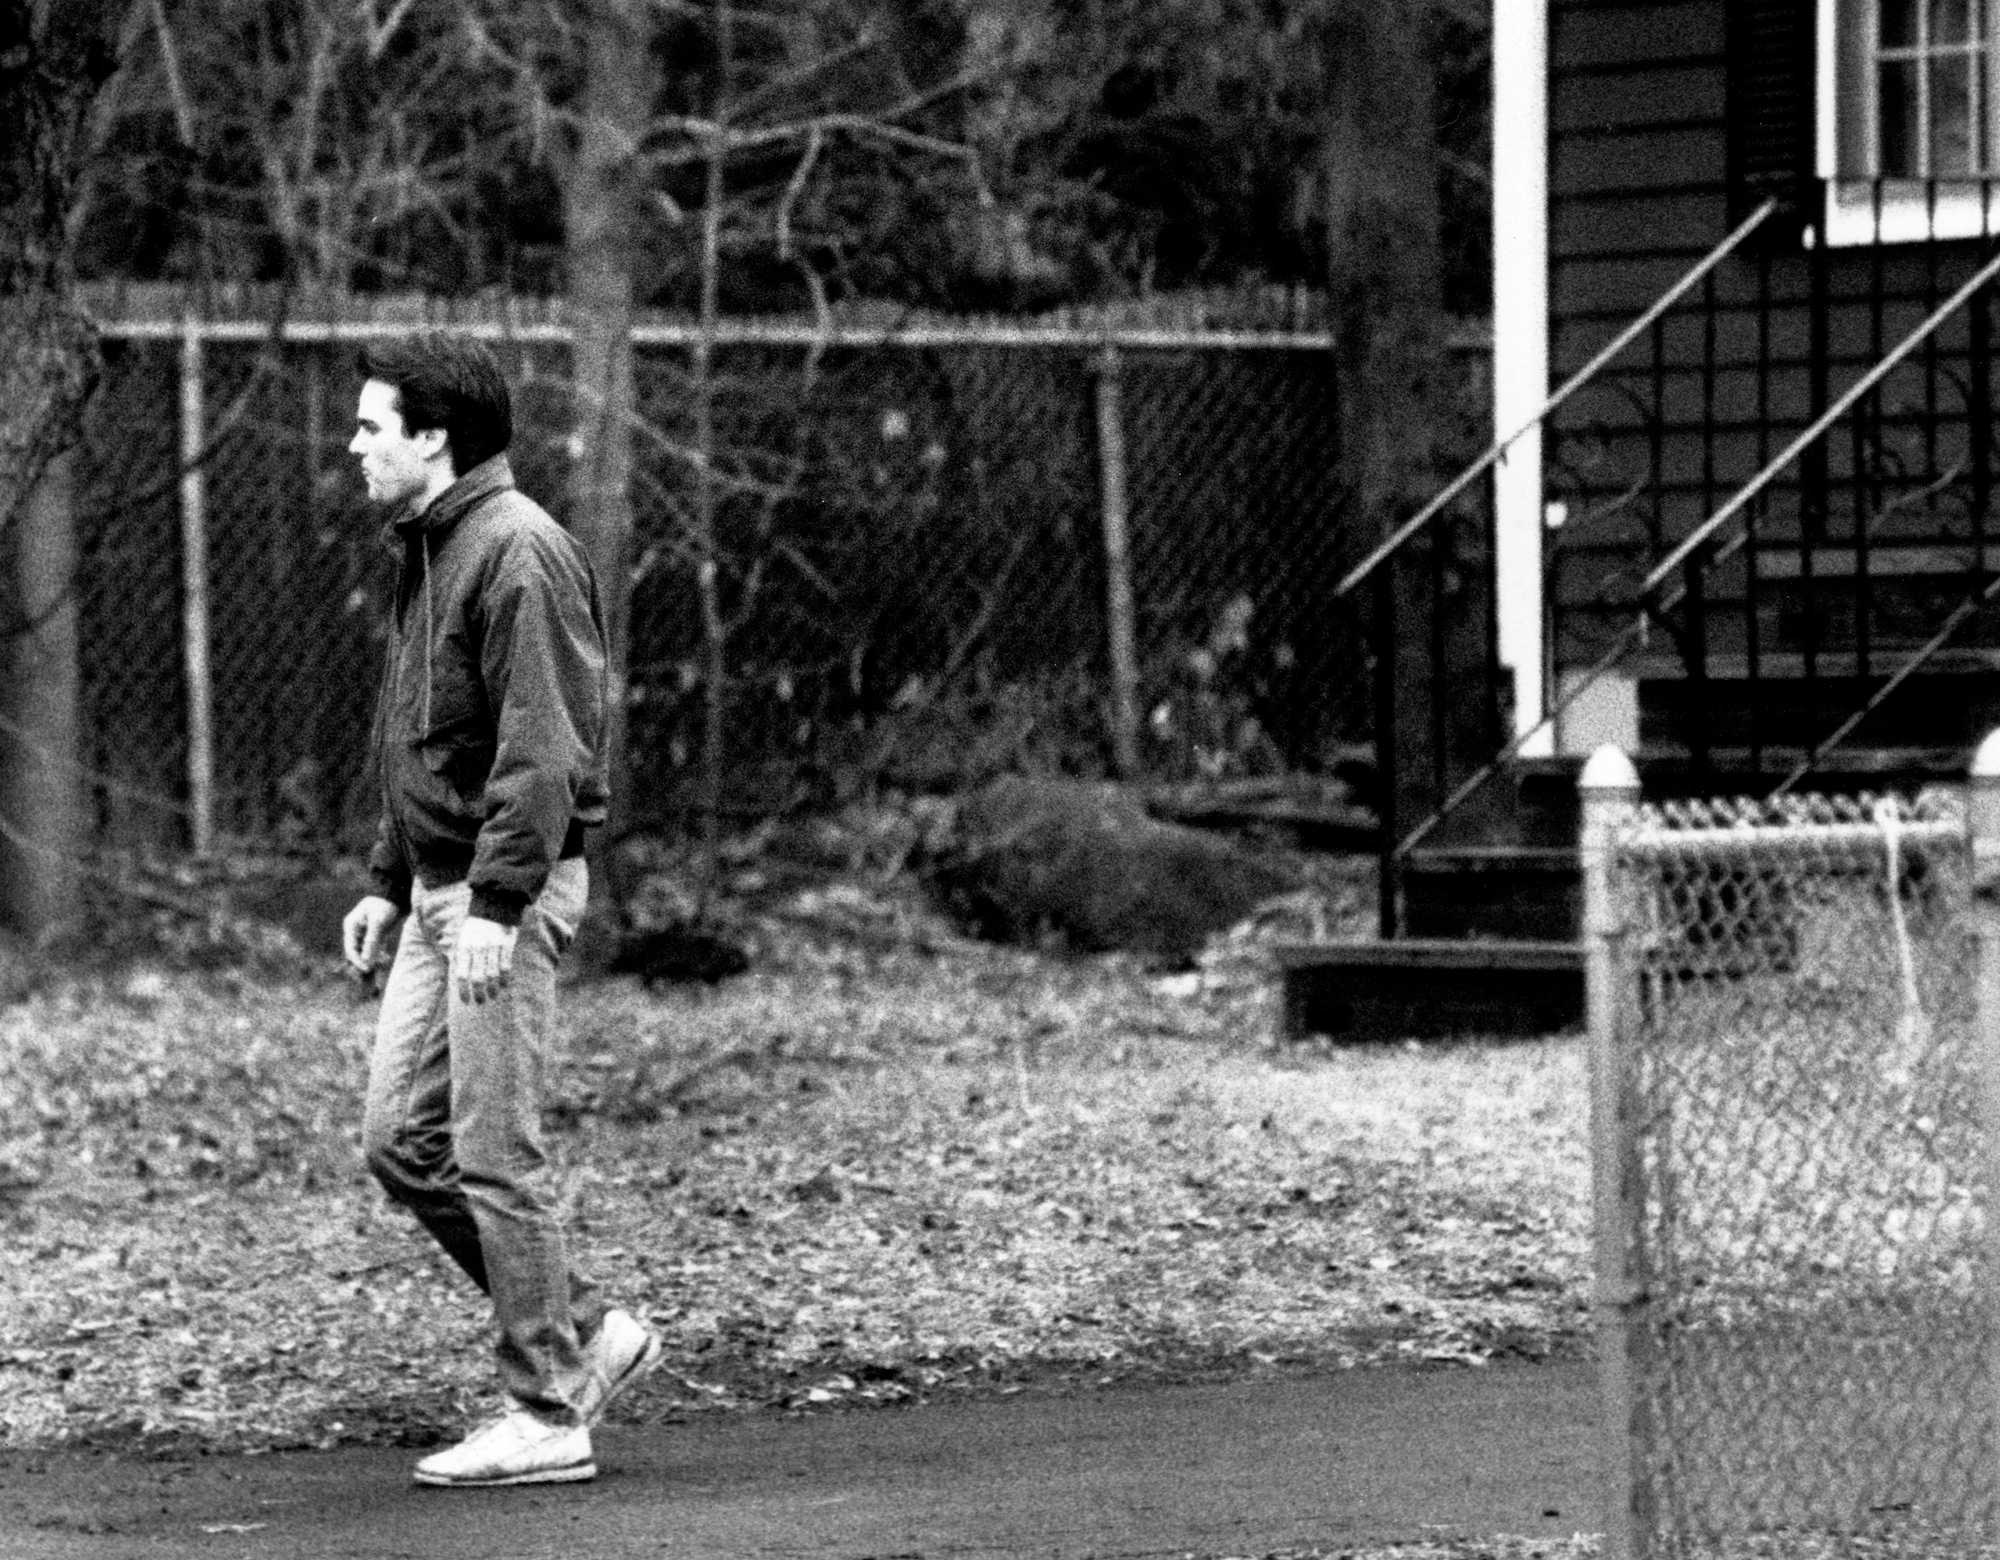 Michael Stuart in the driveway of the family home in Revere on Jan. 10, 1990.